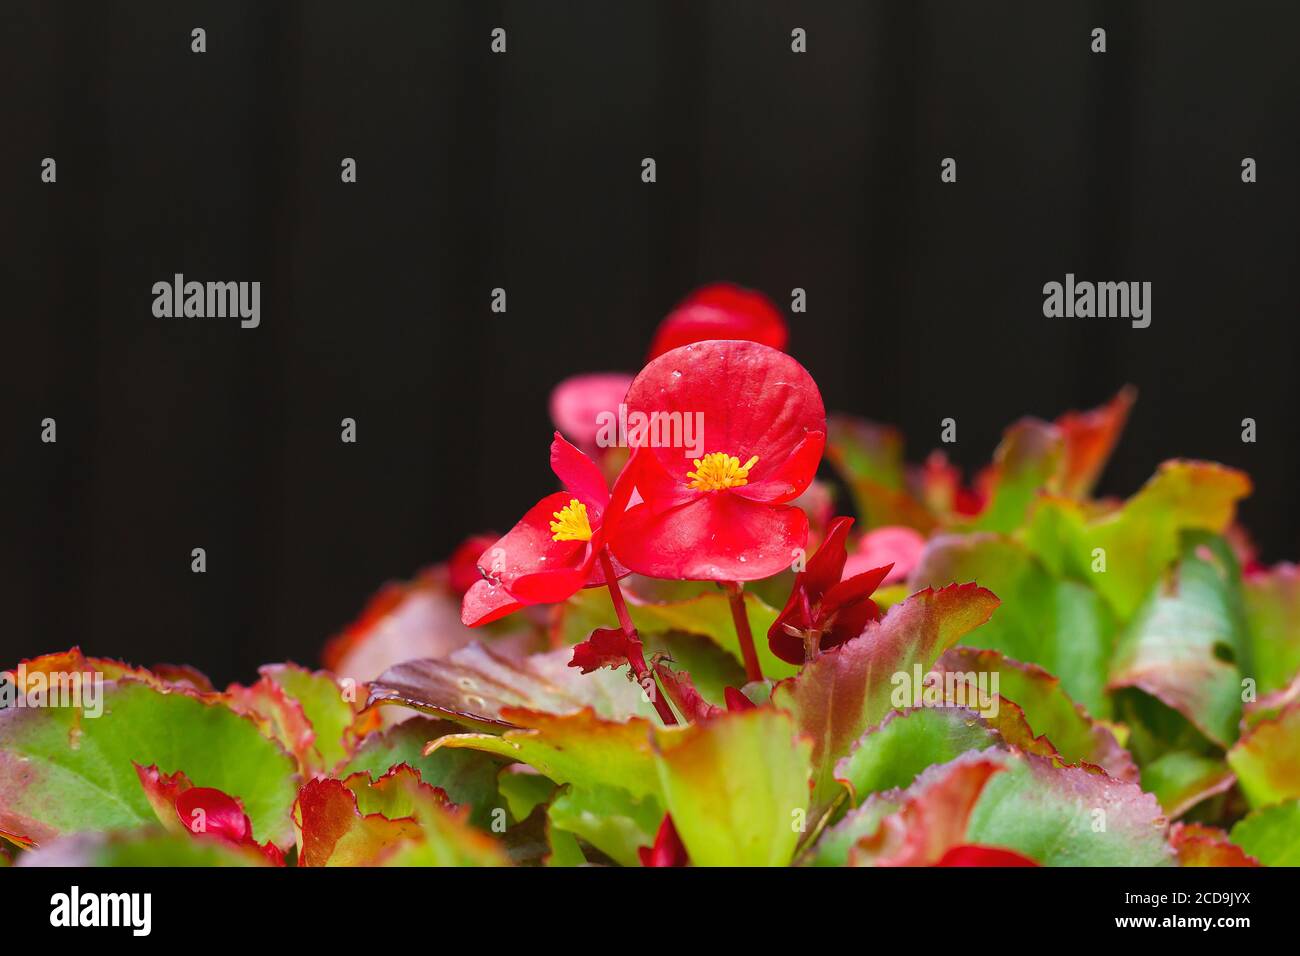 Begonia red flowers Stock Photo